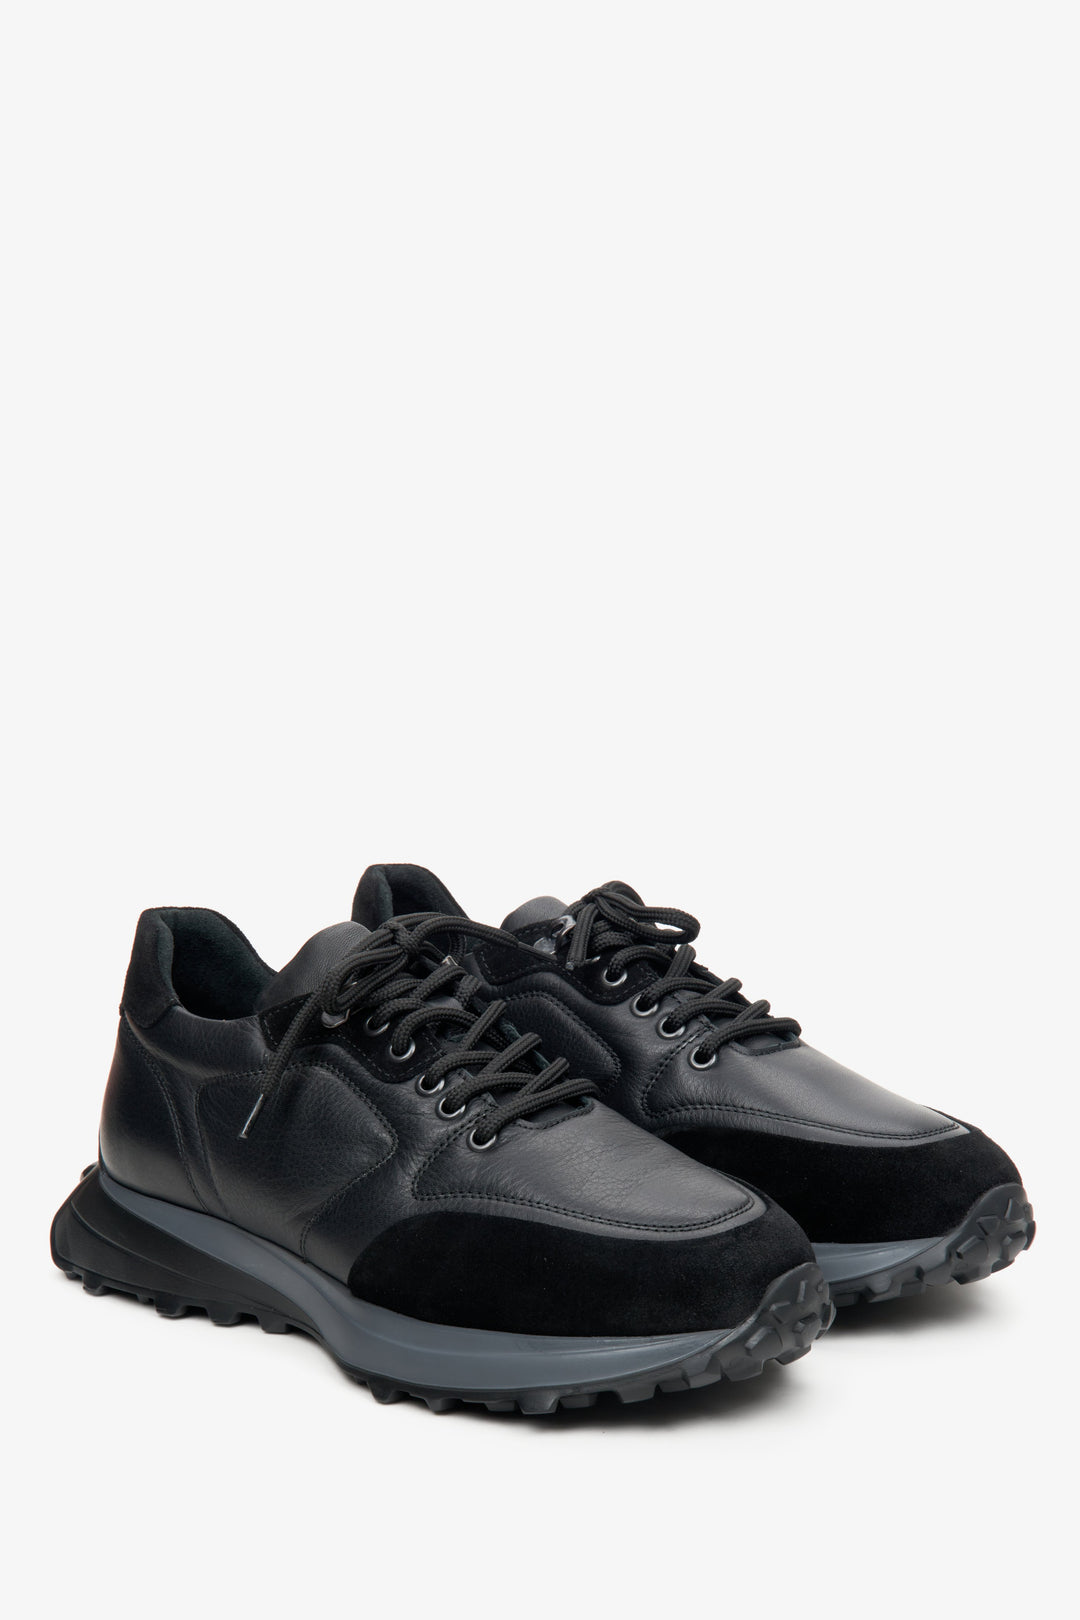 Men's black athletic sneakers made of mixed materials by Estro.